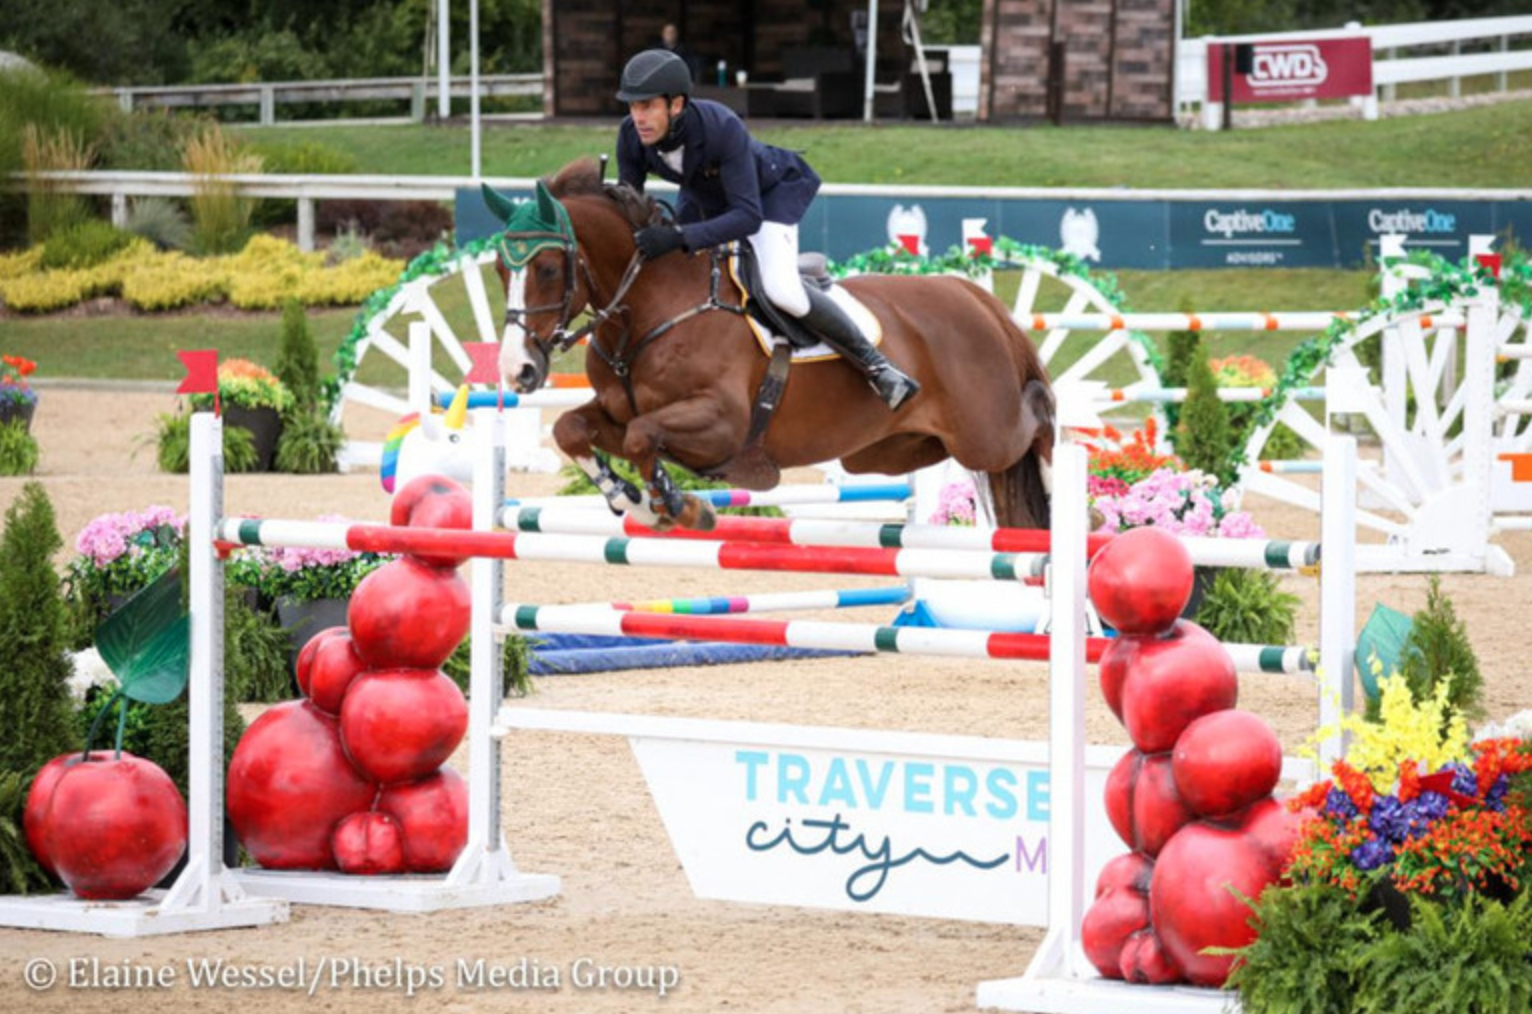 Rowan Willis and Cartouch III make debut in Traverse City with $36,600 Staller Welcome Stake CSI4* win